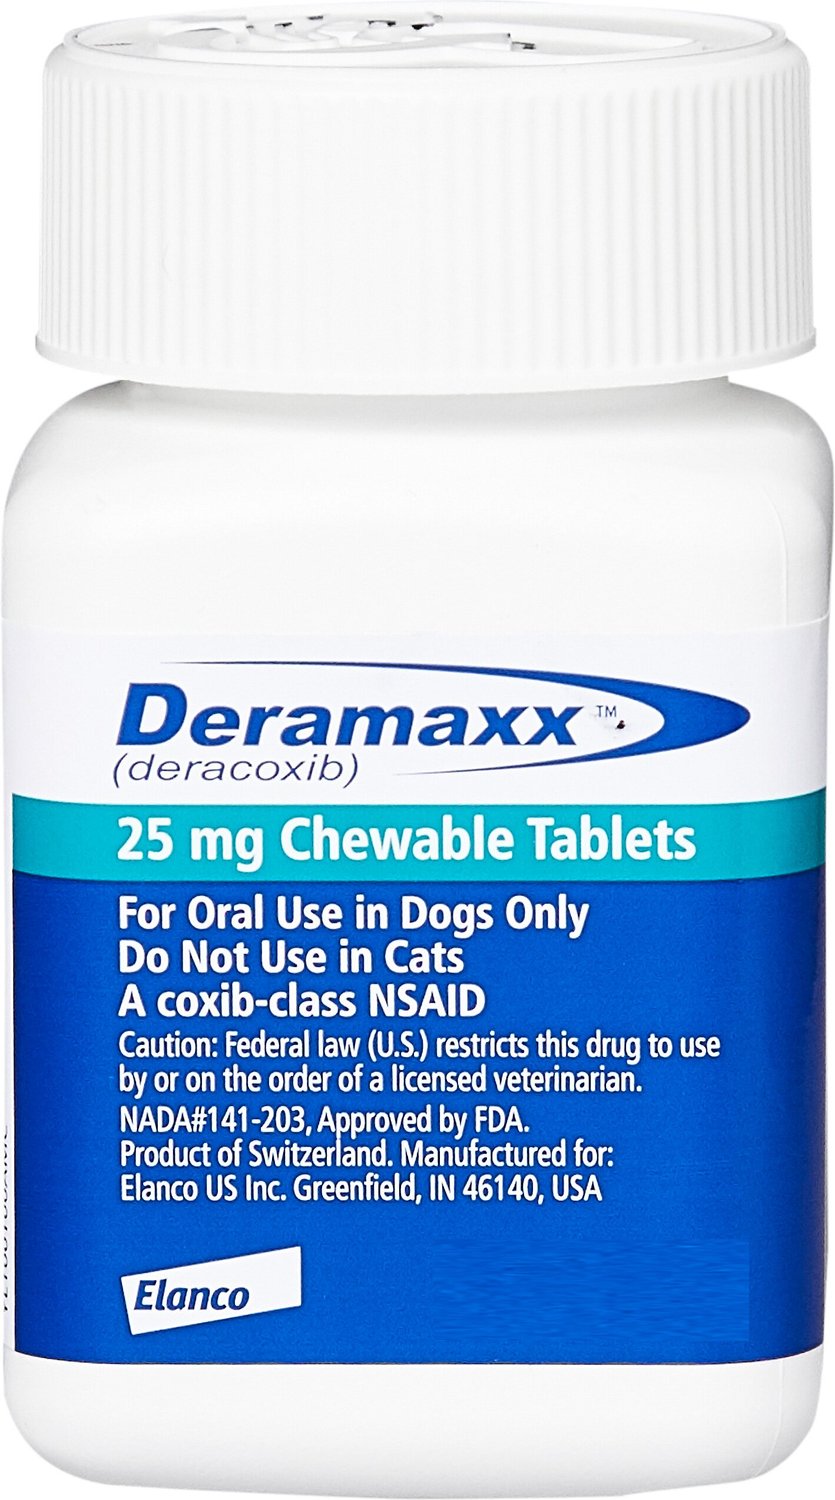 DERAMAXX Chewable Tablets for Dogs, 25 